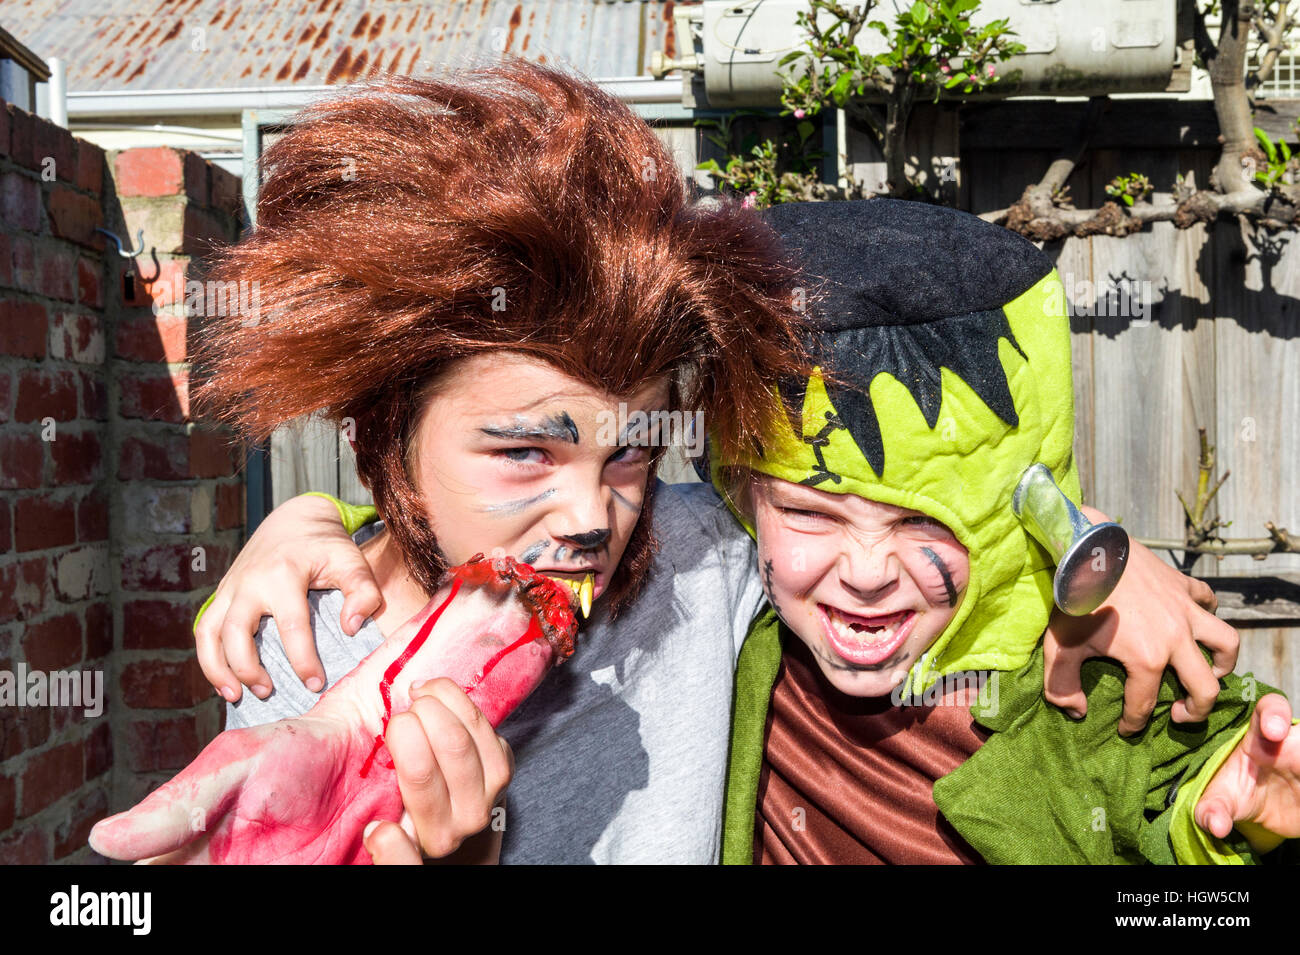 Two friends, a werewolf and Frankenstein, hug each other at a monster party. Stock Photo